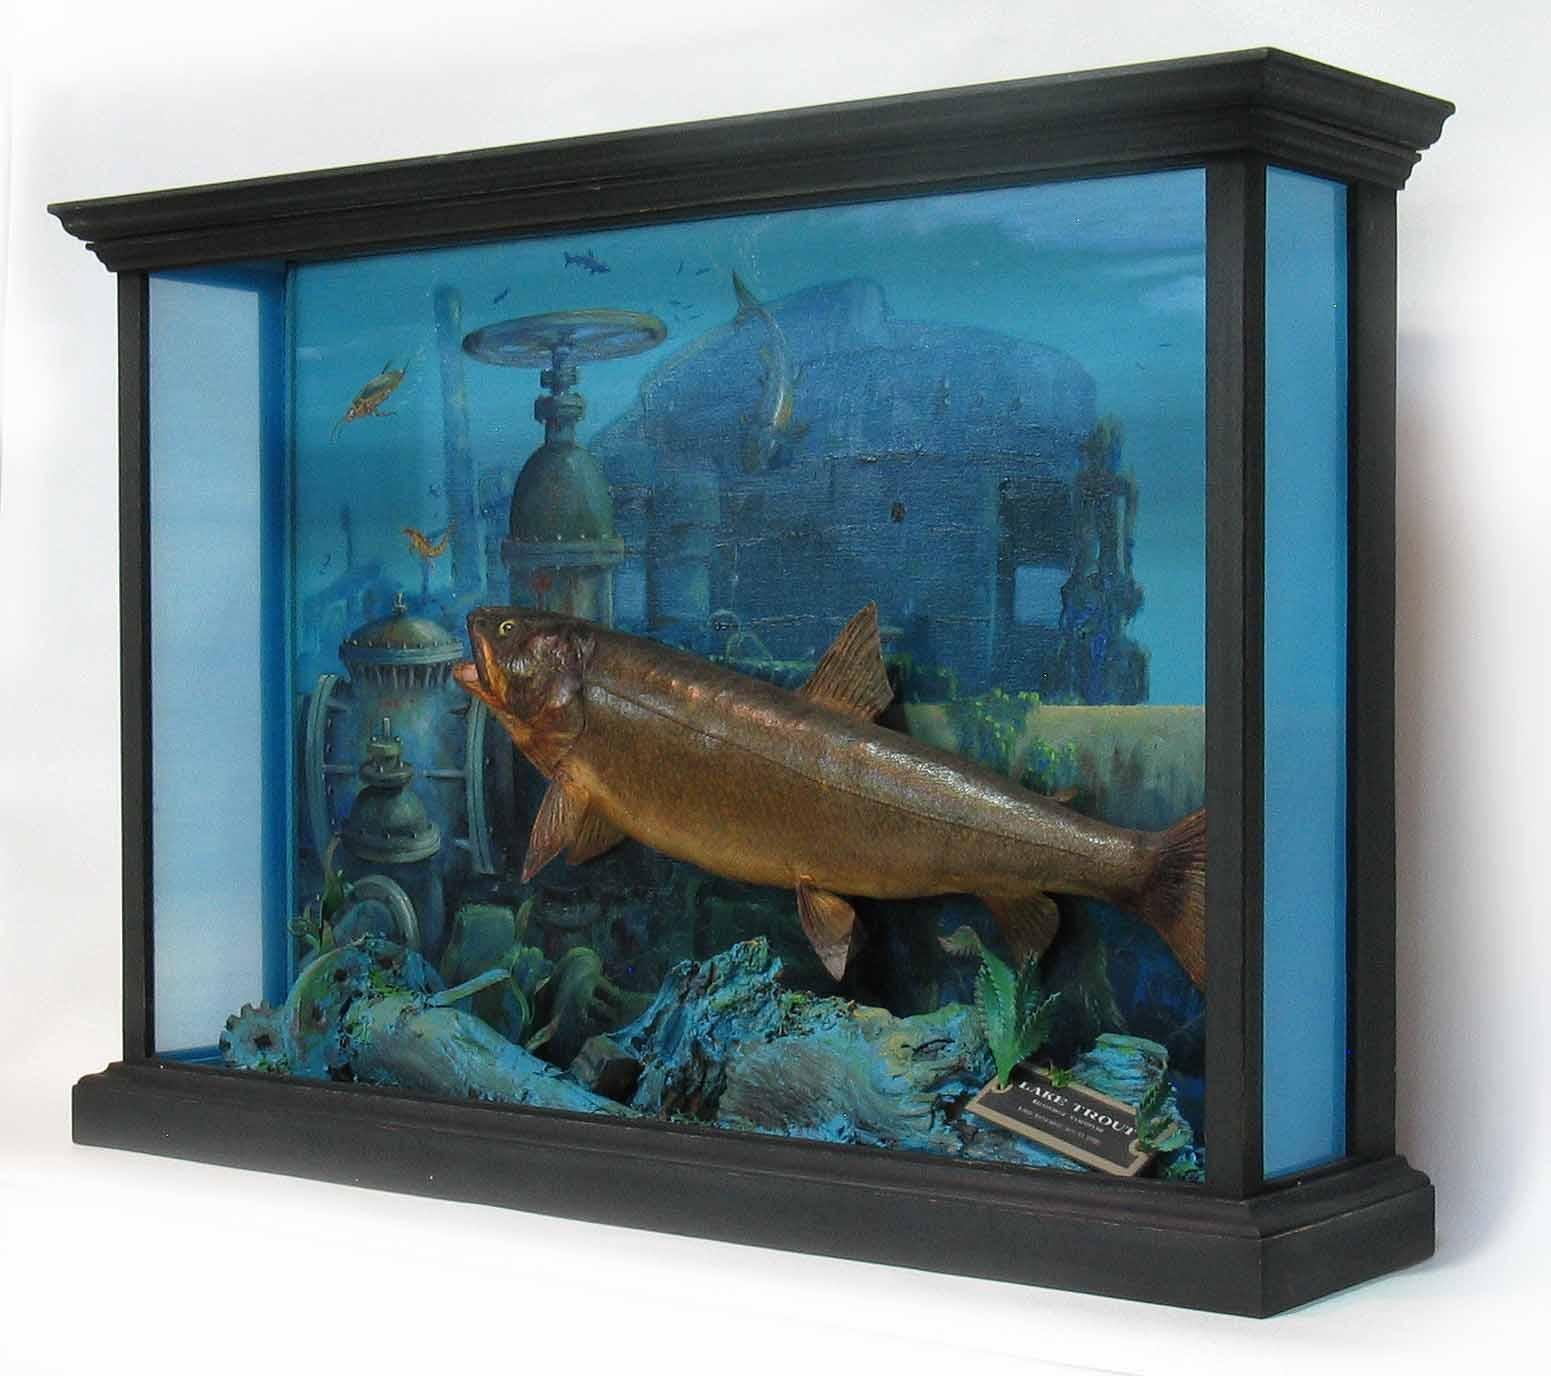 Sporting Art Unusual Fish Taxidermy Diorama Set in Decaying Underwater Industrial Environment